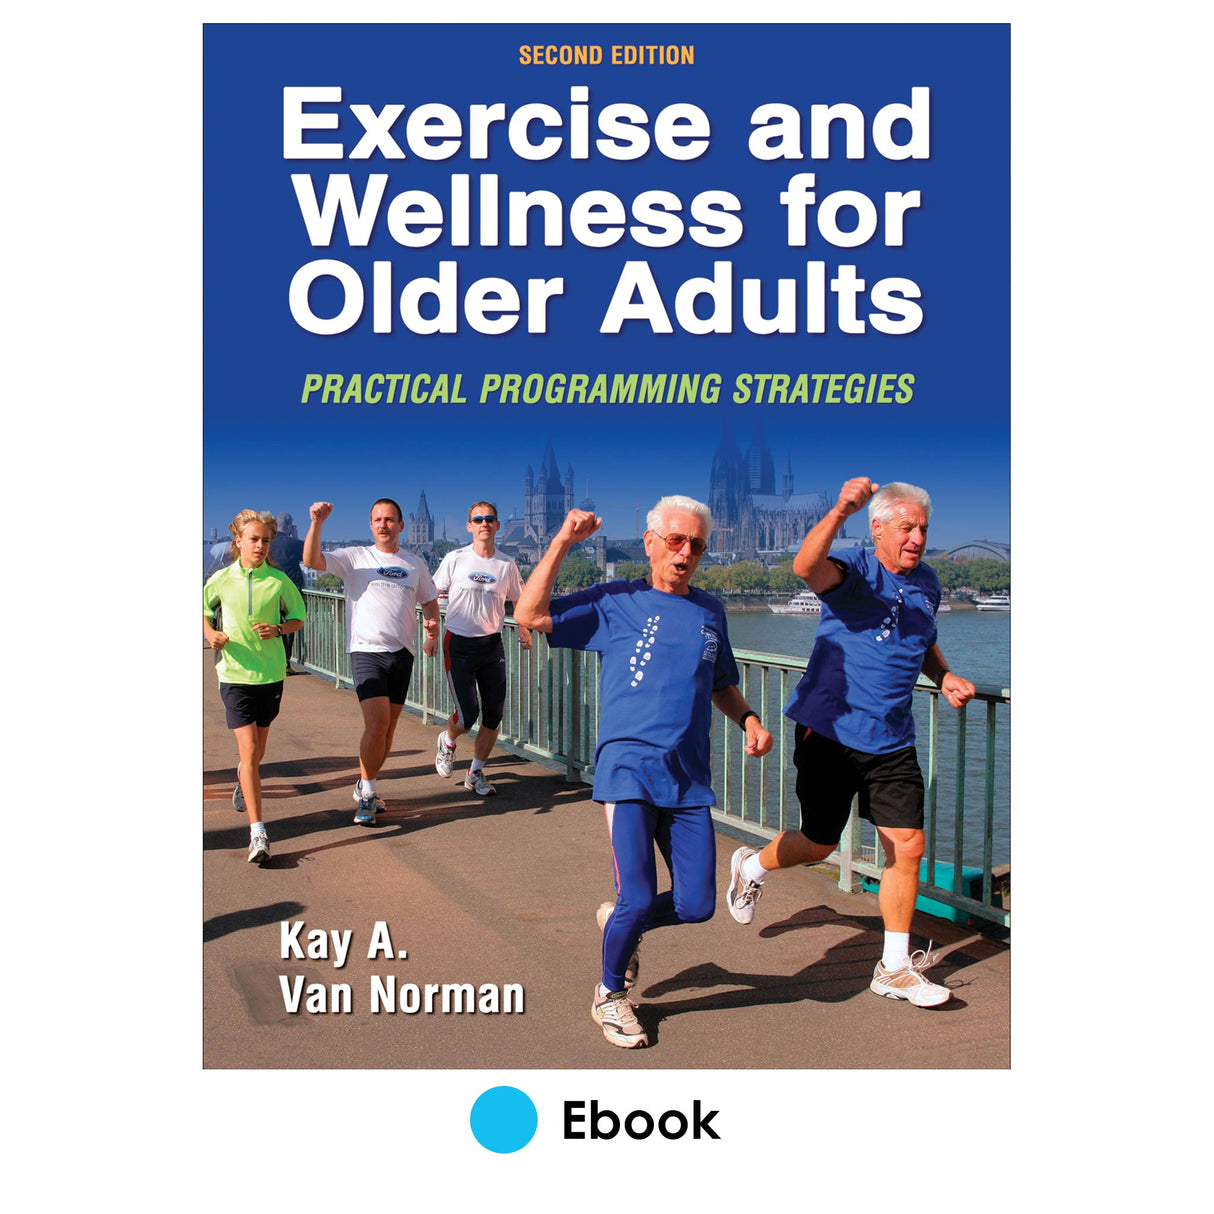 Exercise and Wellness for Older Adults 2nd Edition PDF